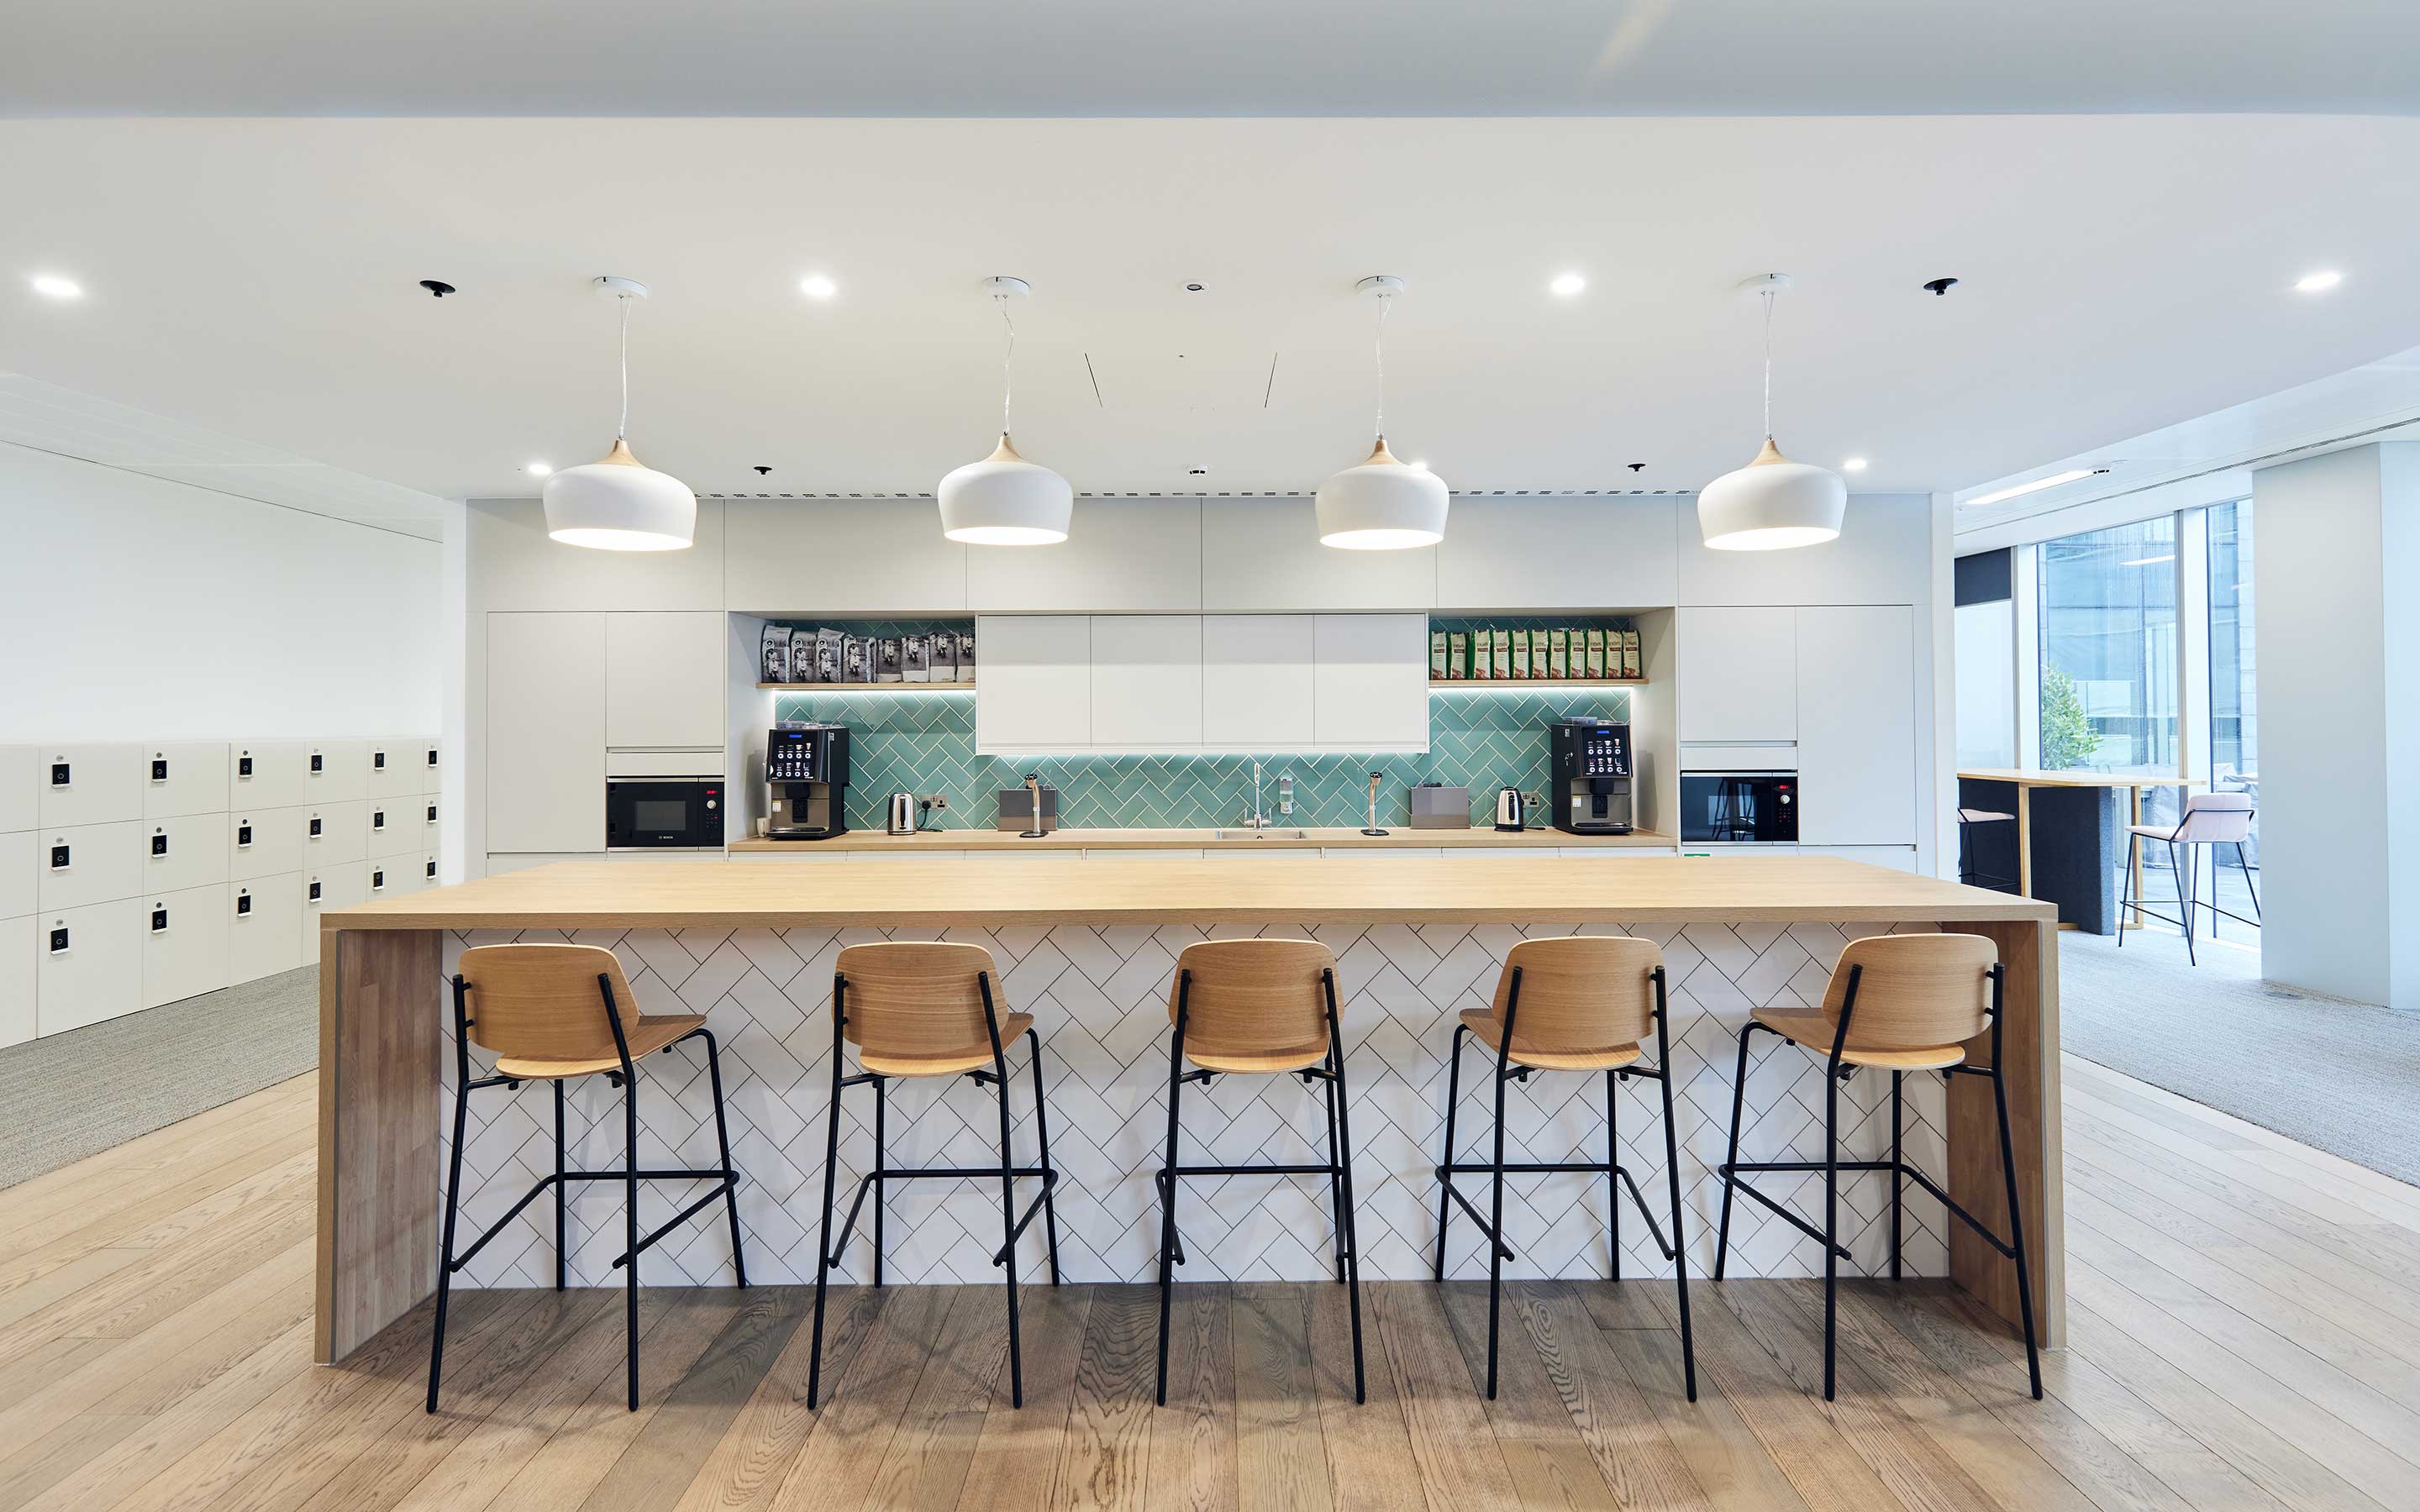 The image is of an office teapoint. High wooden breakfast stools tuck under an island unit. The floor is wood, and the kitchen backsplash tiles are duck egg blue